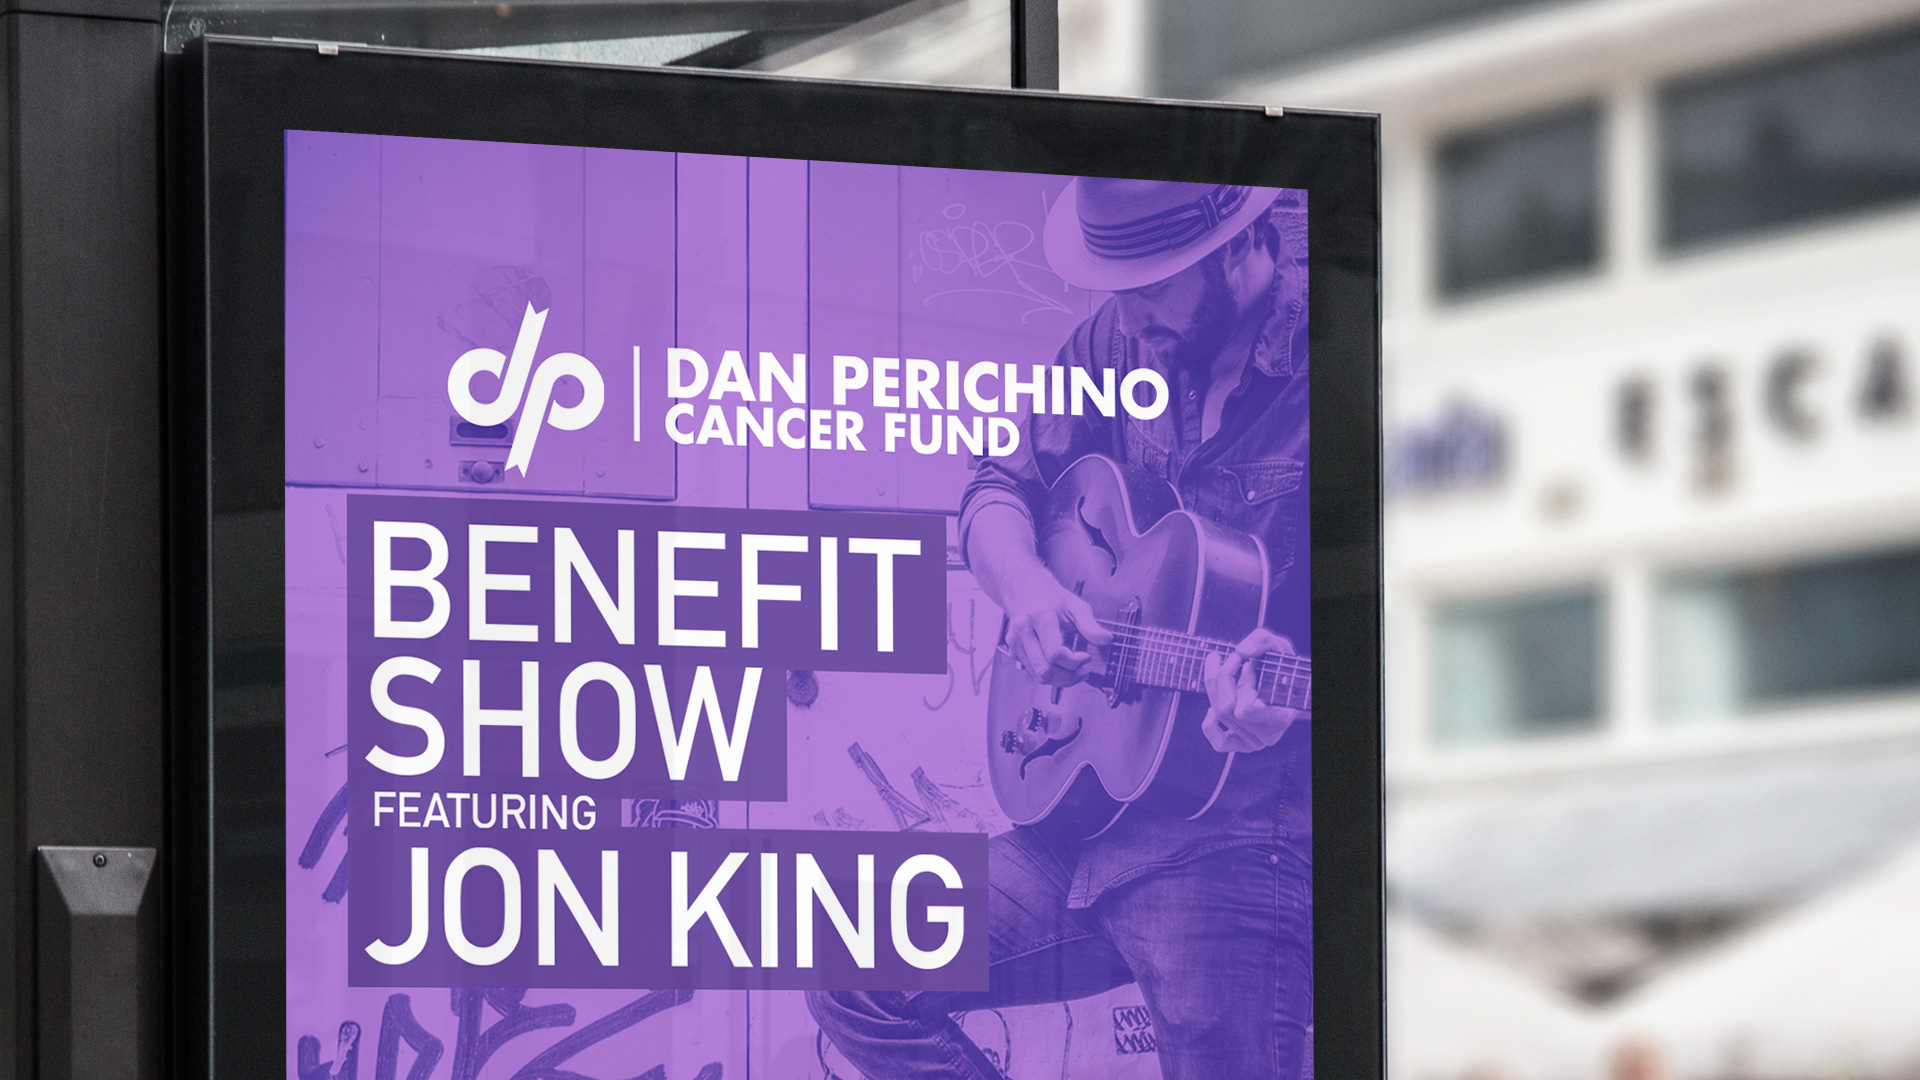 Dan-Perichino-Cancer-Fund-Benefit-Show-Poster-Zoom